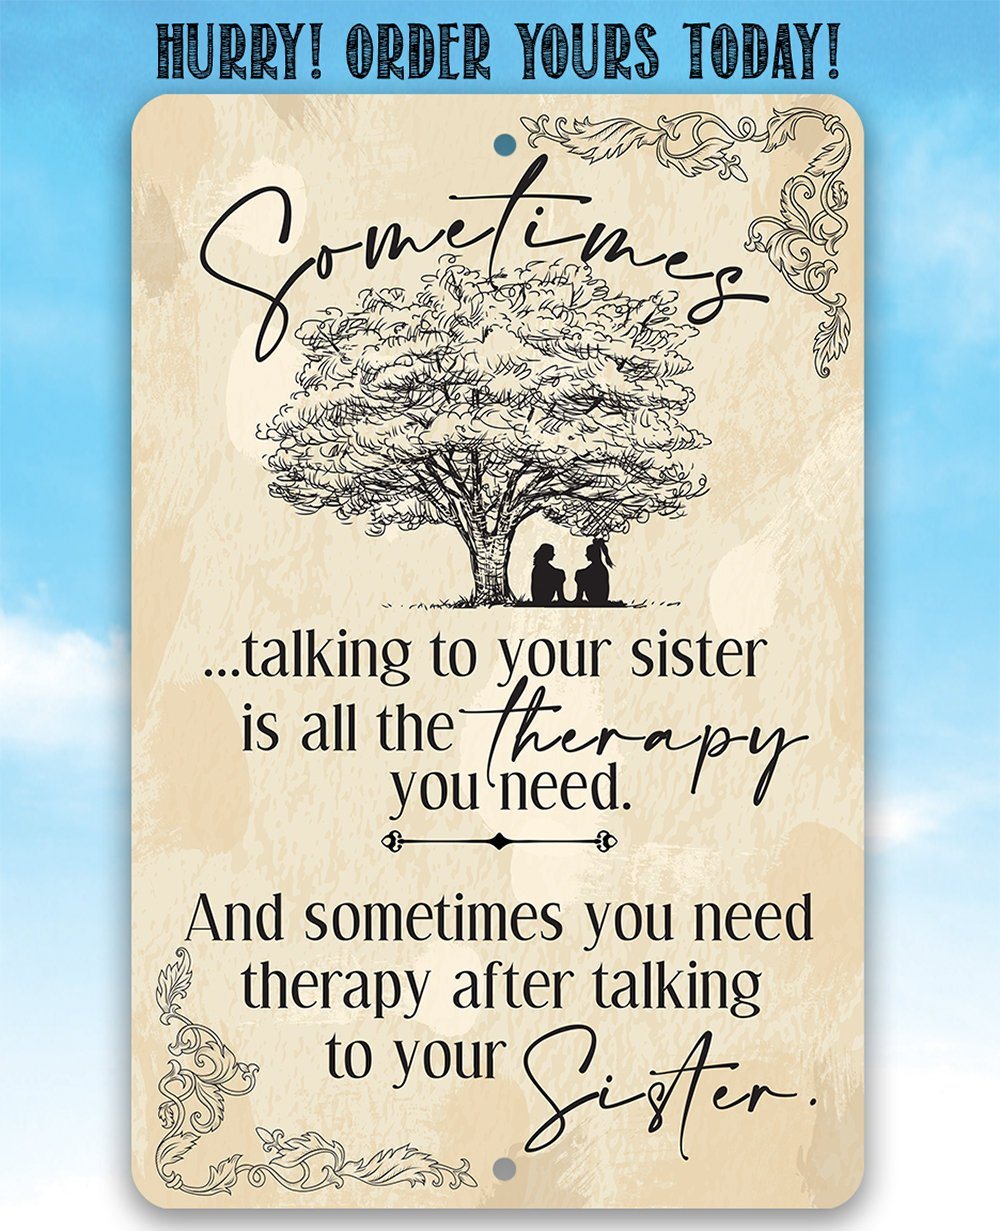 Sometimes Talking to Your Sister is All the Therapy You Need - Metal Sign | Lone Star Art.